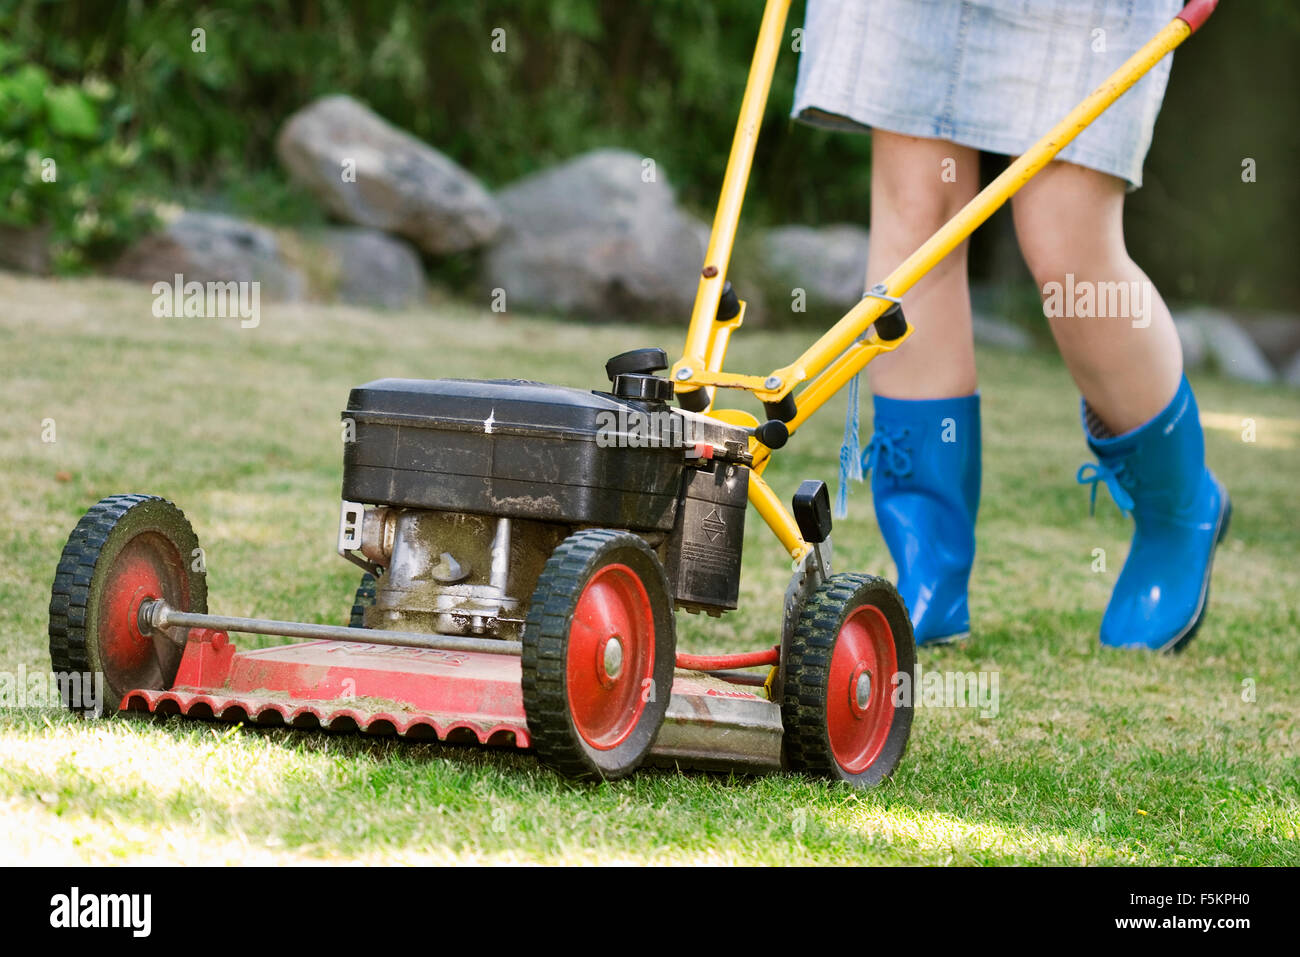 Woman Mowing Lawn High Resolution Stock Photography and Images - Alamy